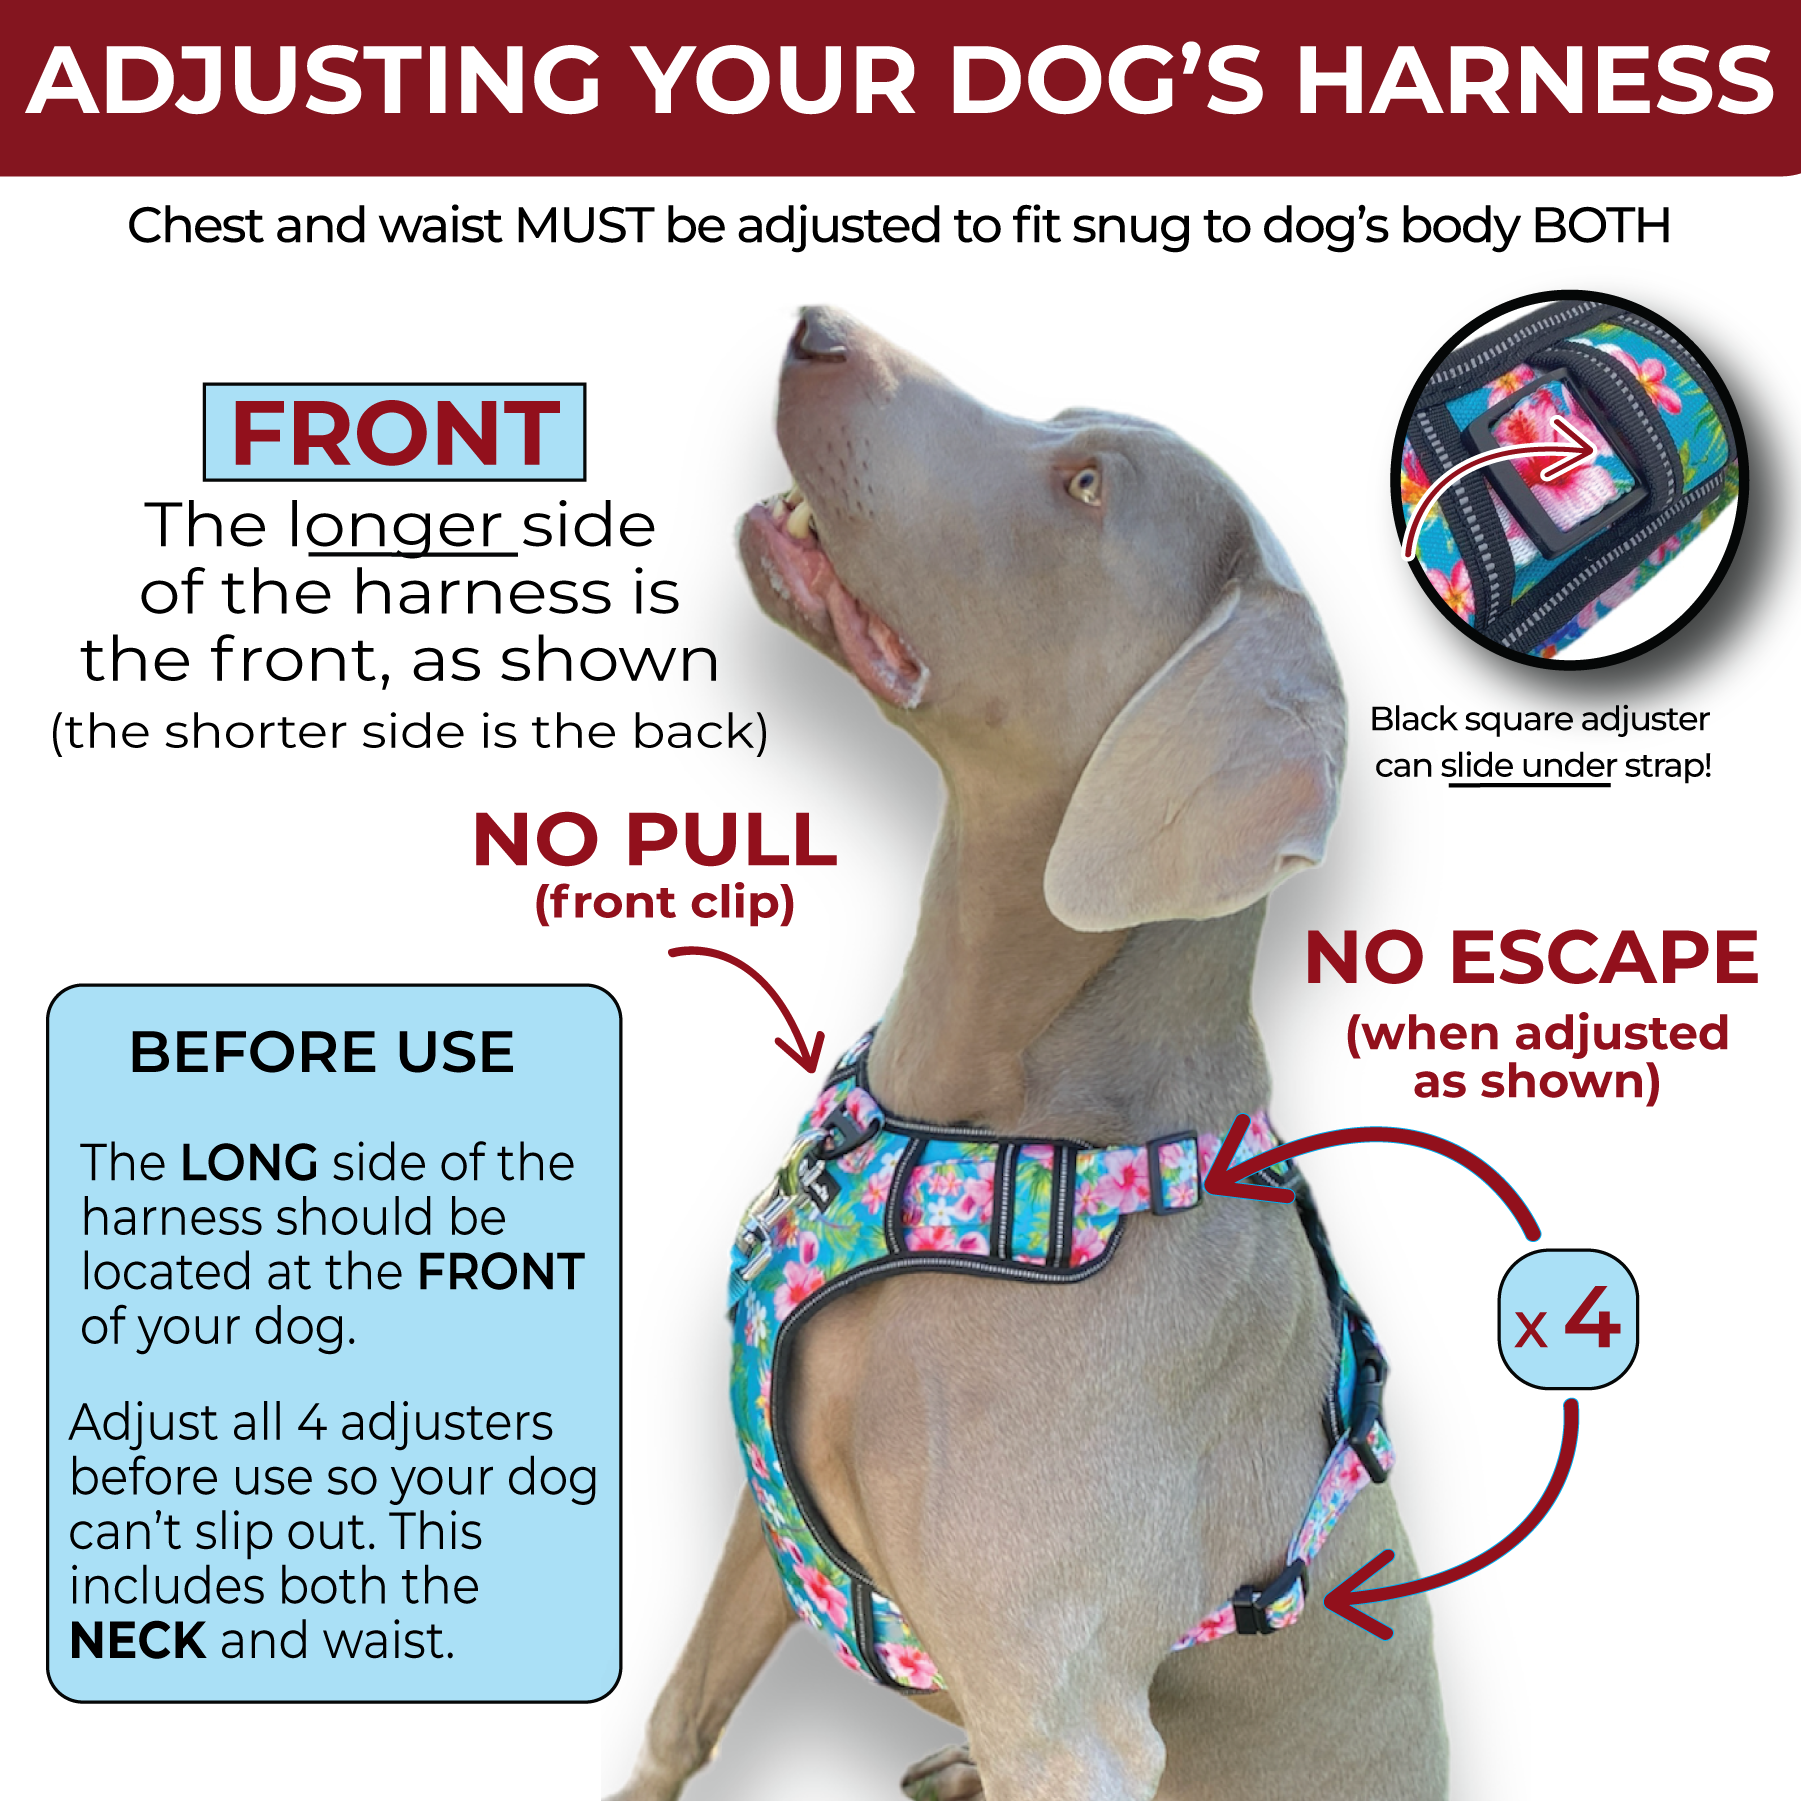 an infographic showing how to adjust our no escape dog harness